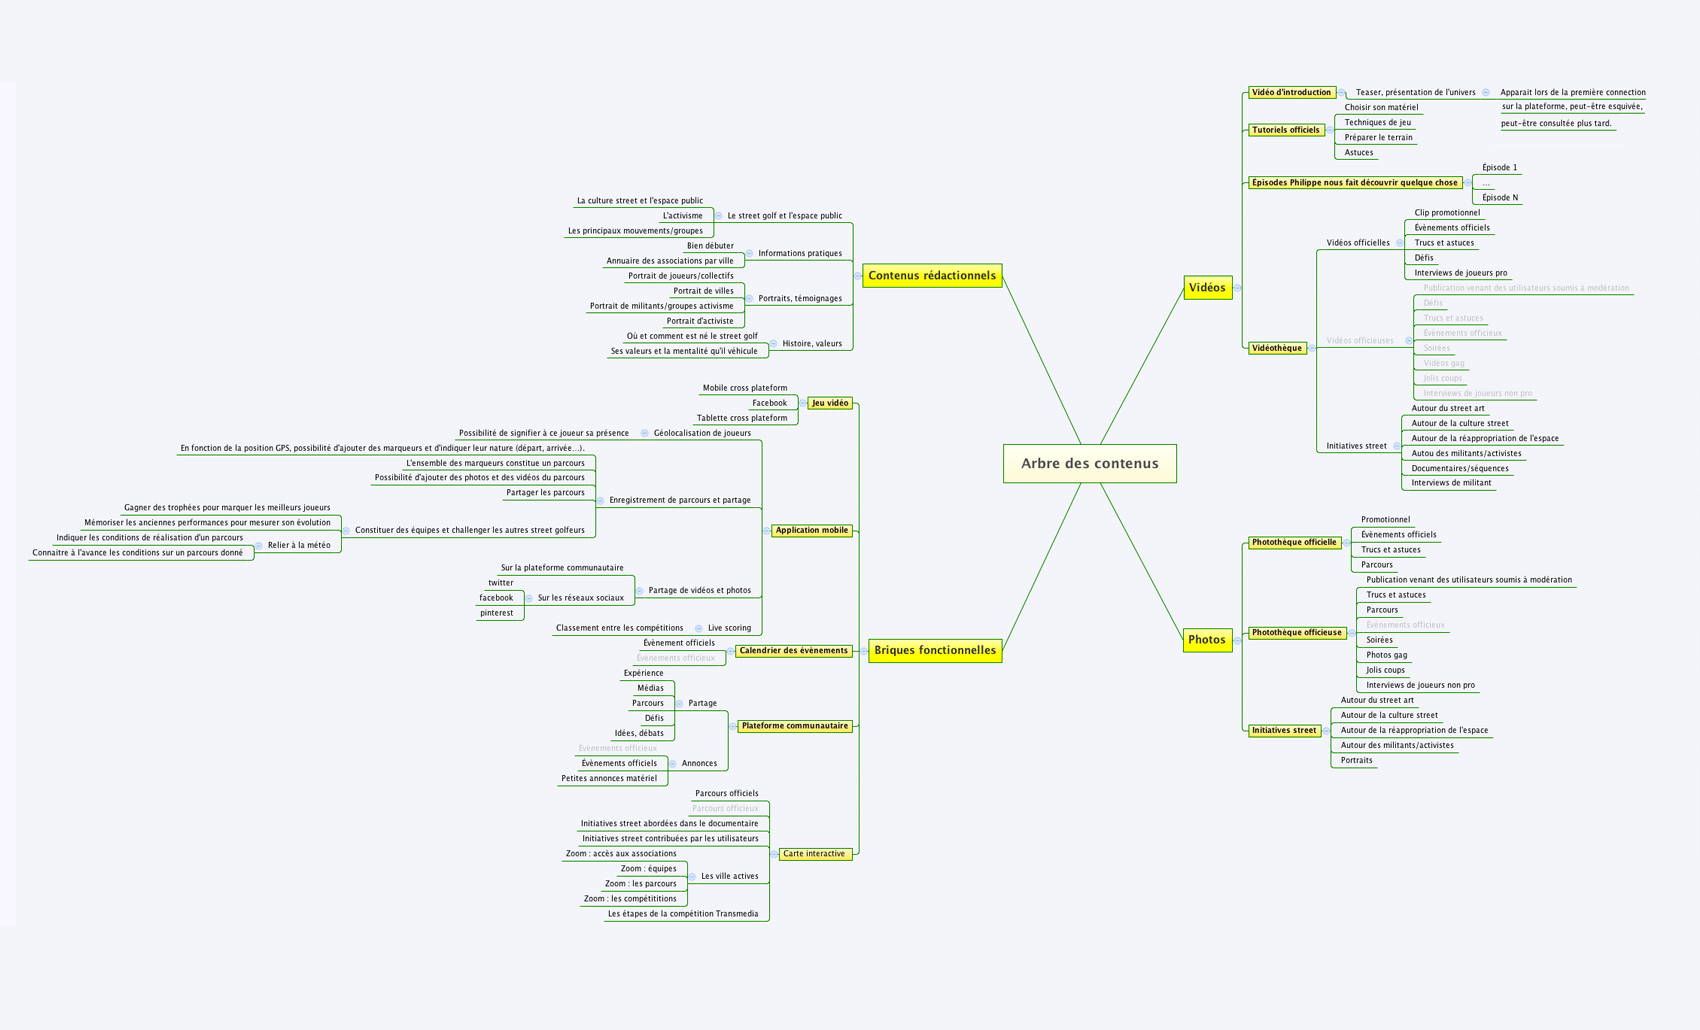 Exploration map ordered by content typology